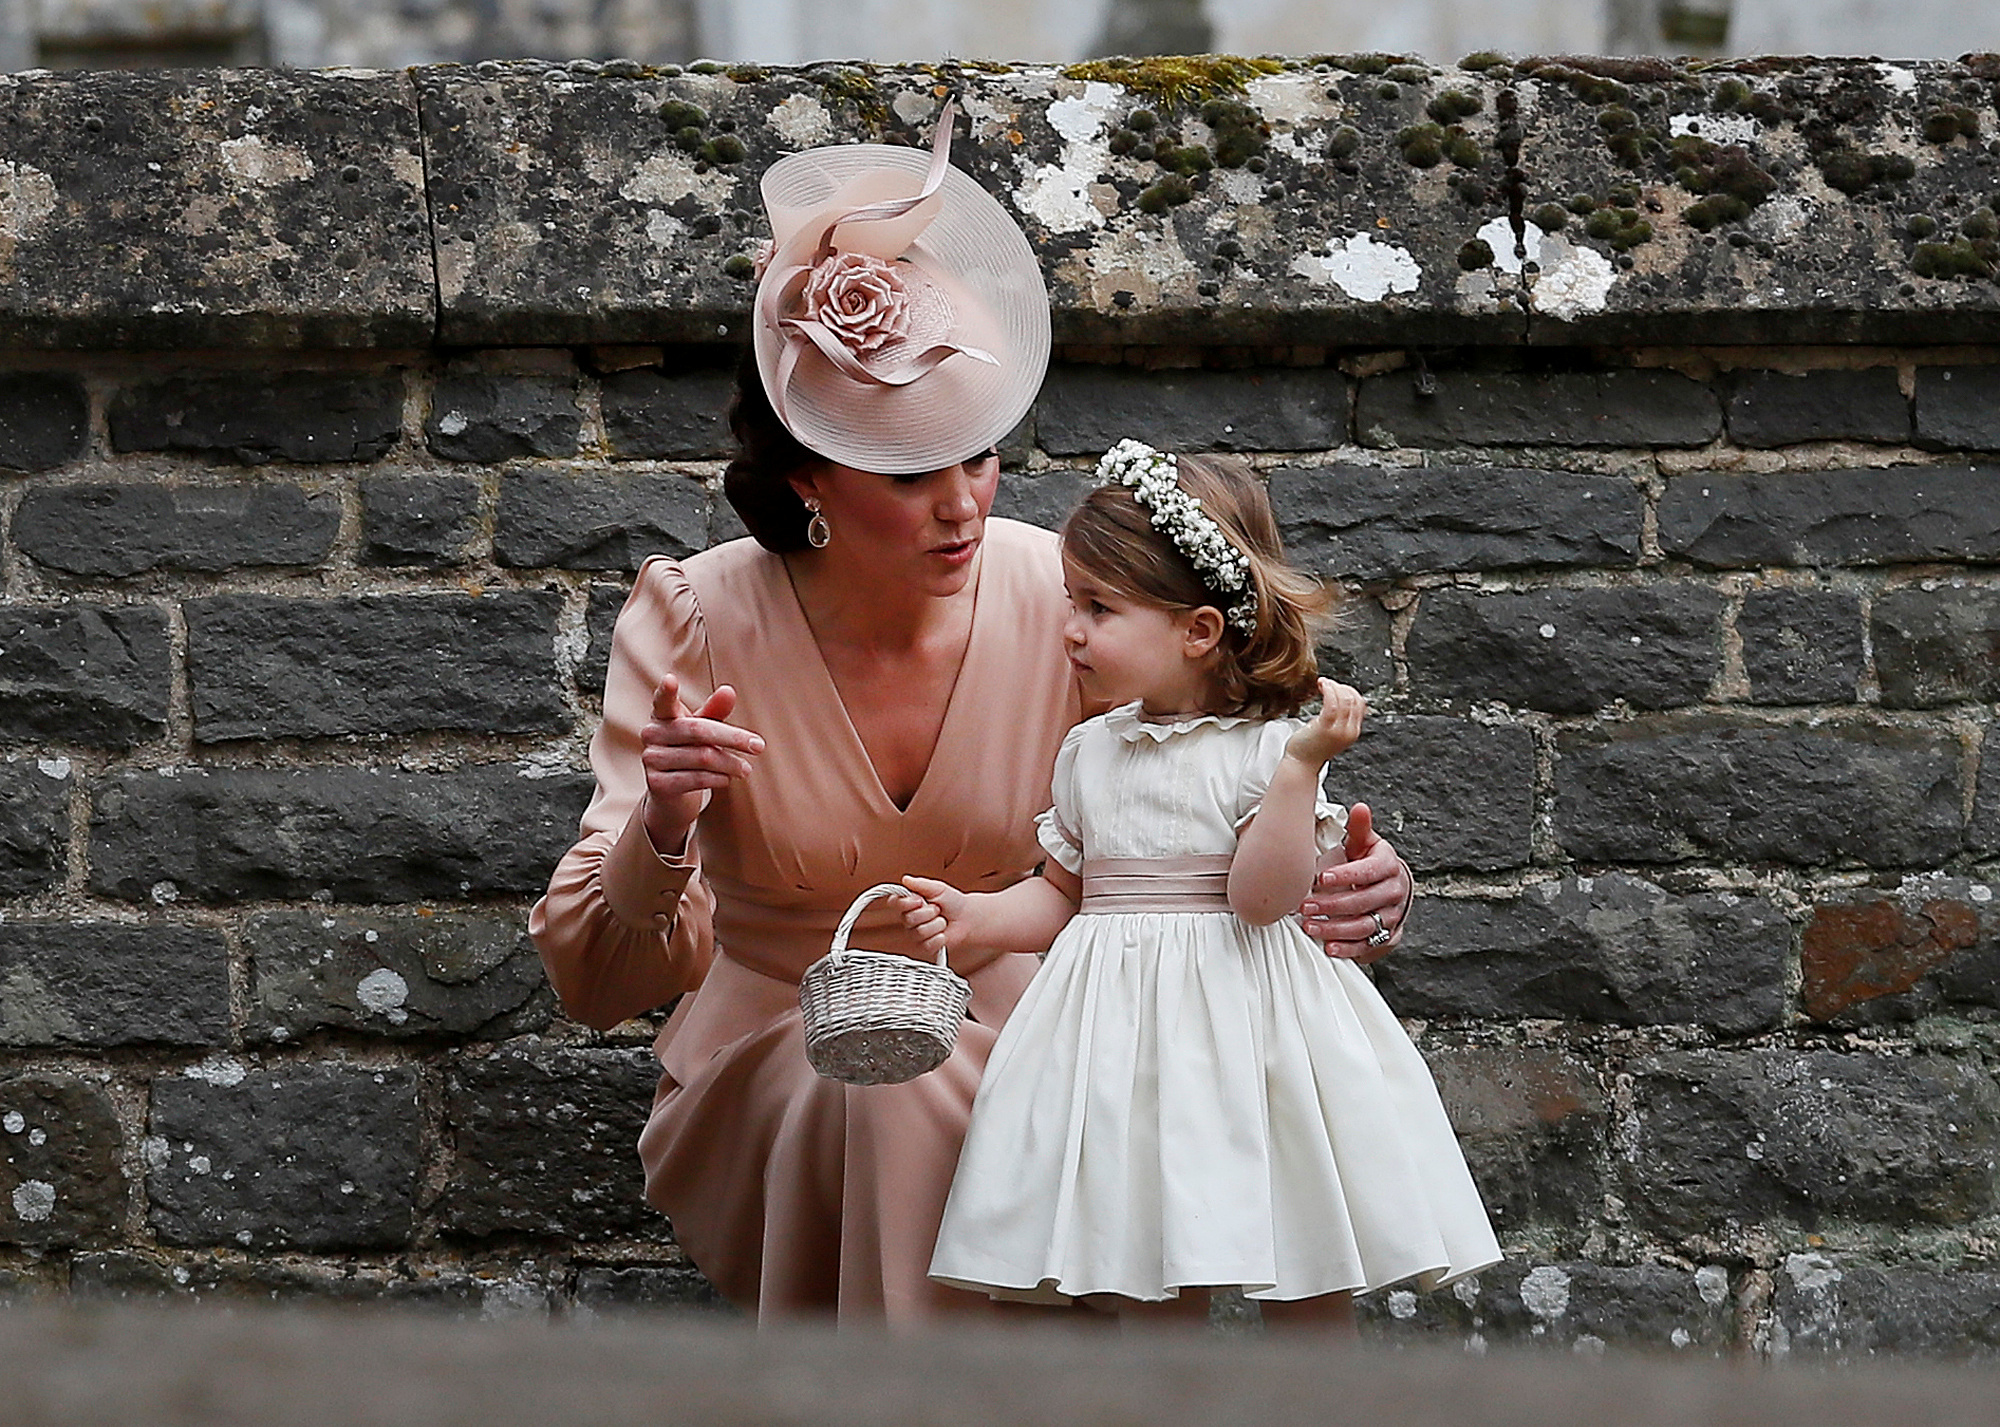 Britain's Catherine, Duchess of Cambridge stands with her daughter Princess Charlotte, a bridesmaid, following the wedding of her sister Pippa Middleton to James Matthews at St Mark's Church in Englefield, west of London, on May 20, 2017.    REUTERS/Kirsty Wigglesworth/Pool     TPX IMAGES OF THE DAY - RC1F573DD930